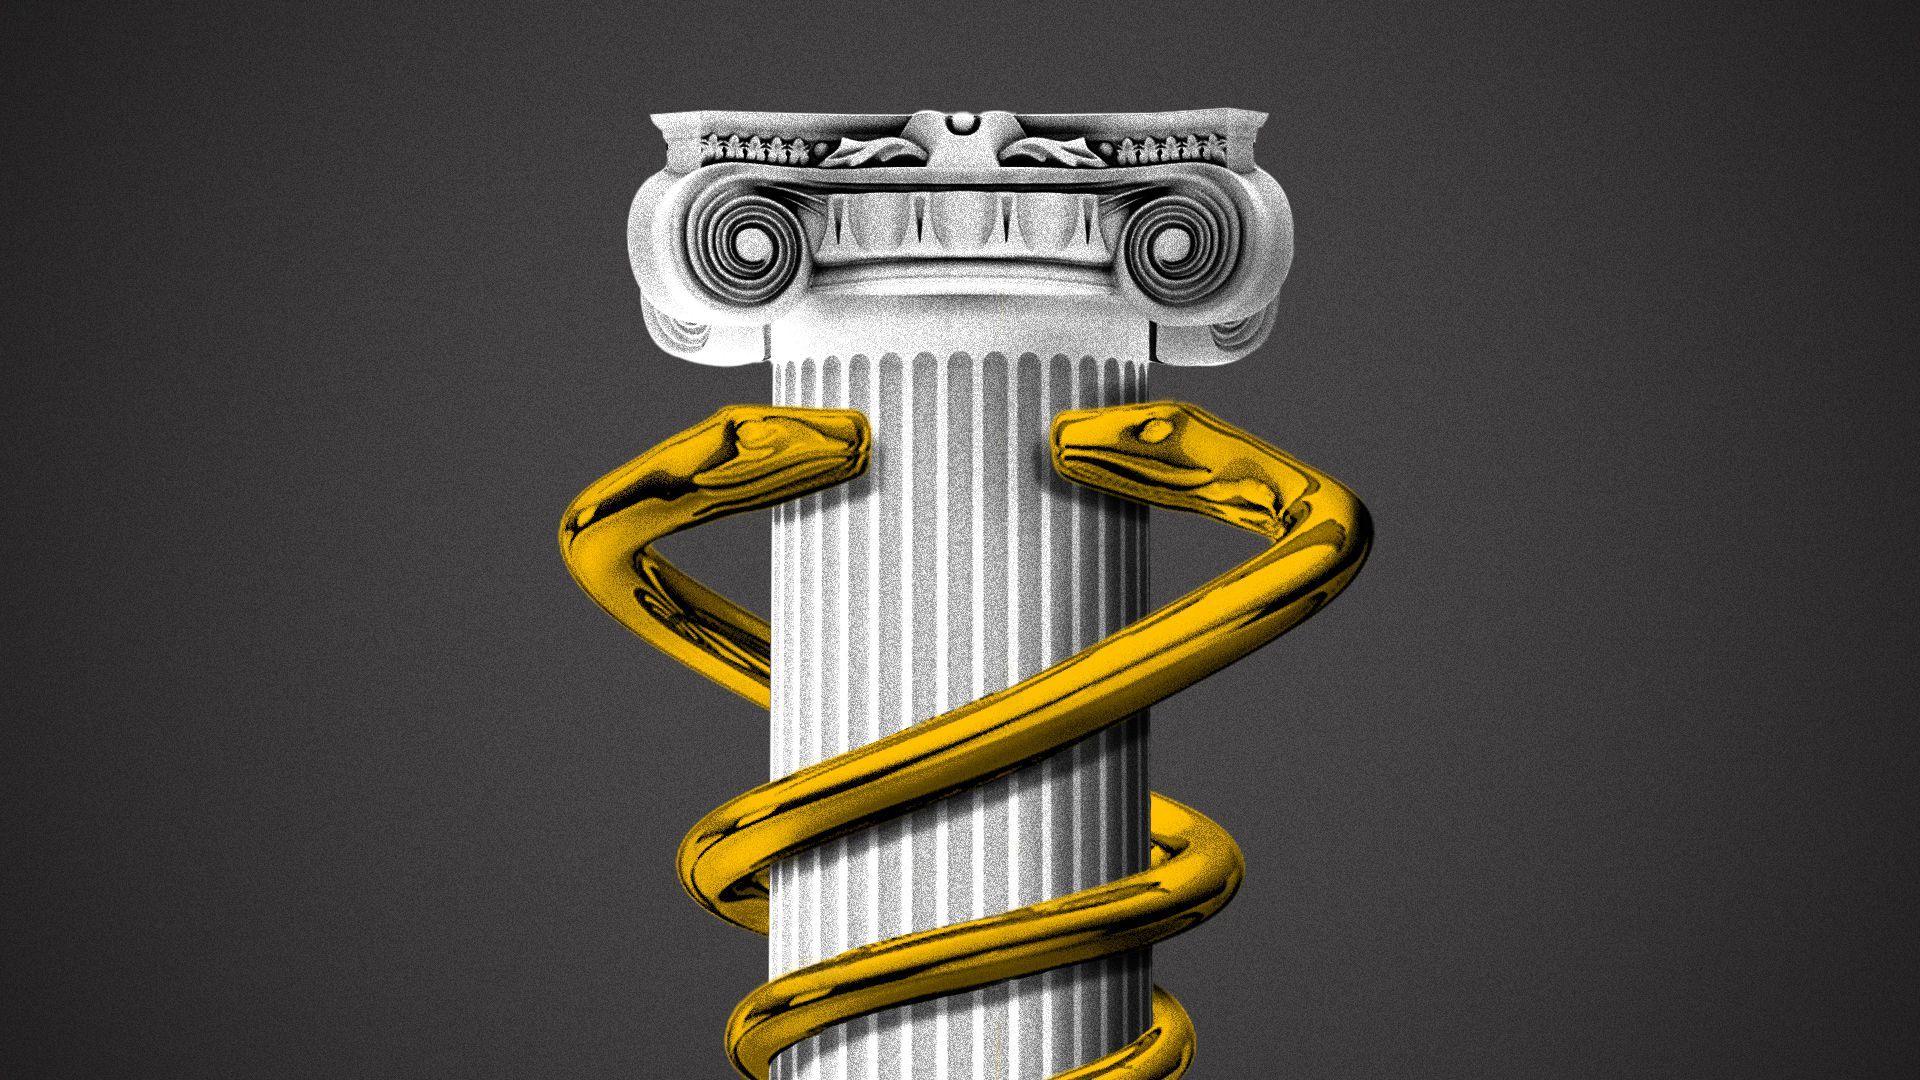 Illustration of a column wrapped in snakes from a caduceus.